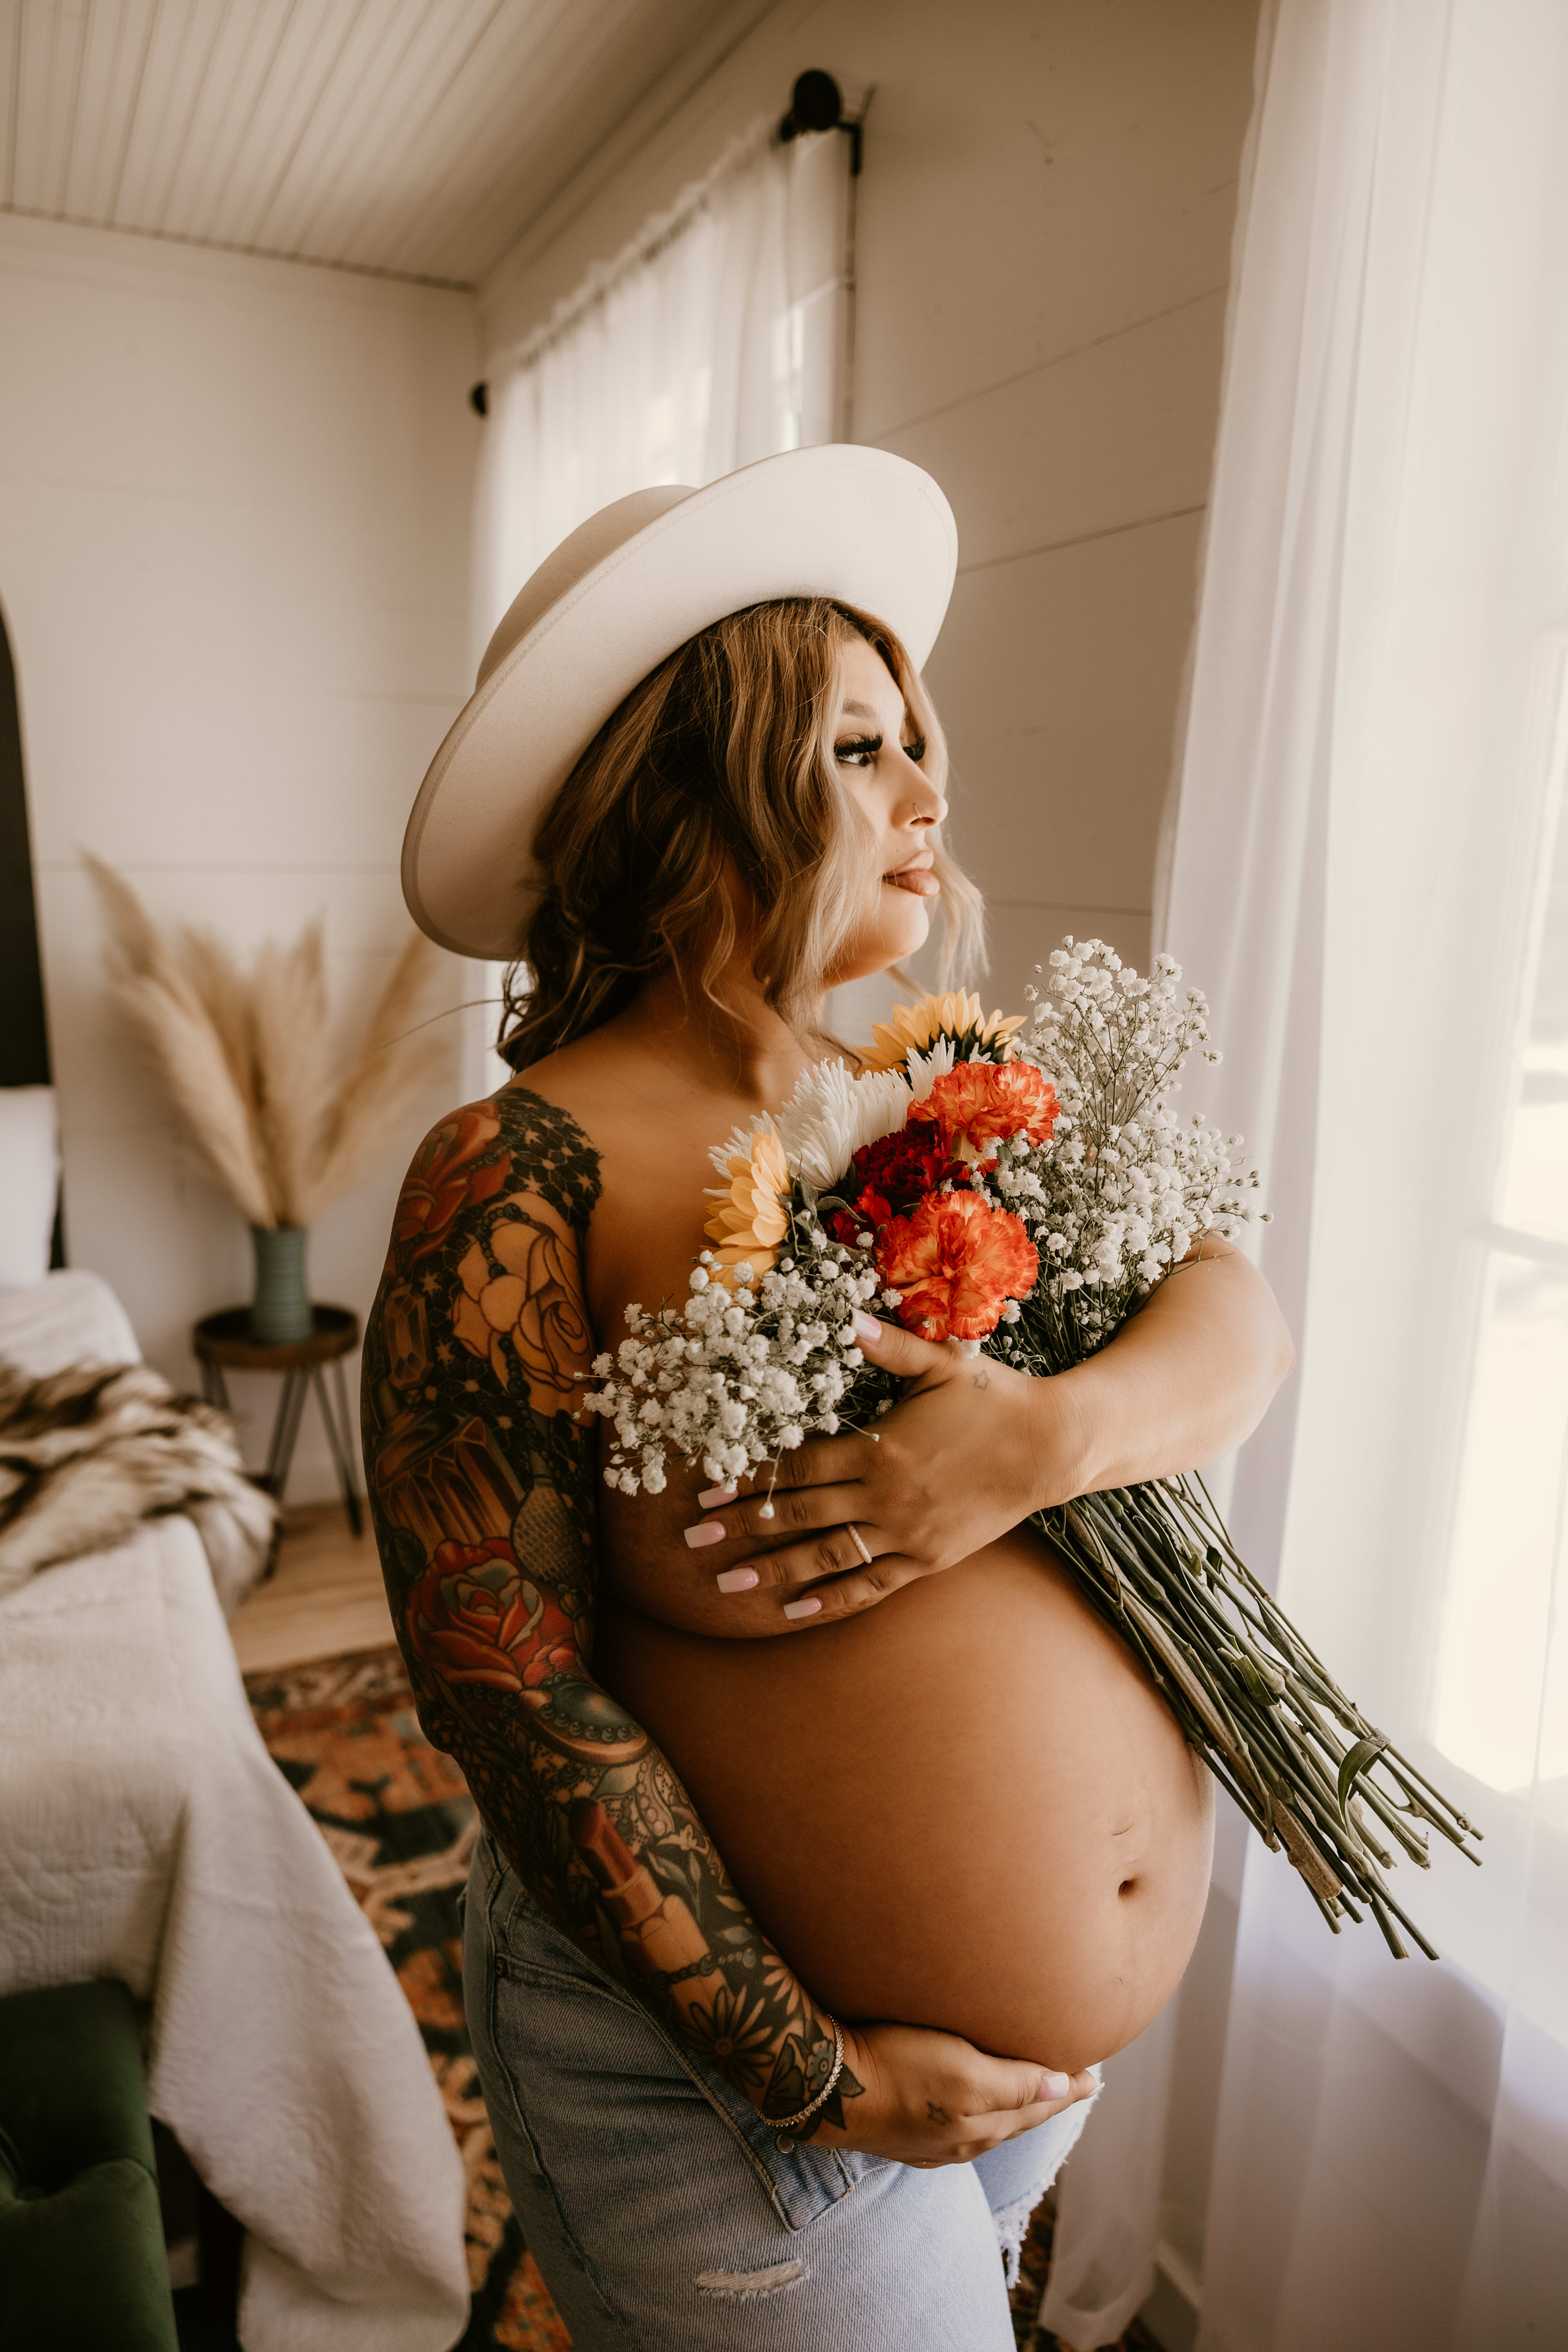 A pregnant woman wearing a white hat and holding flowers for her boho maternity photoshoot.